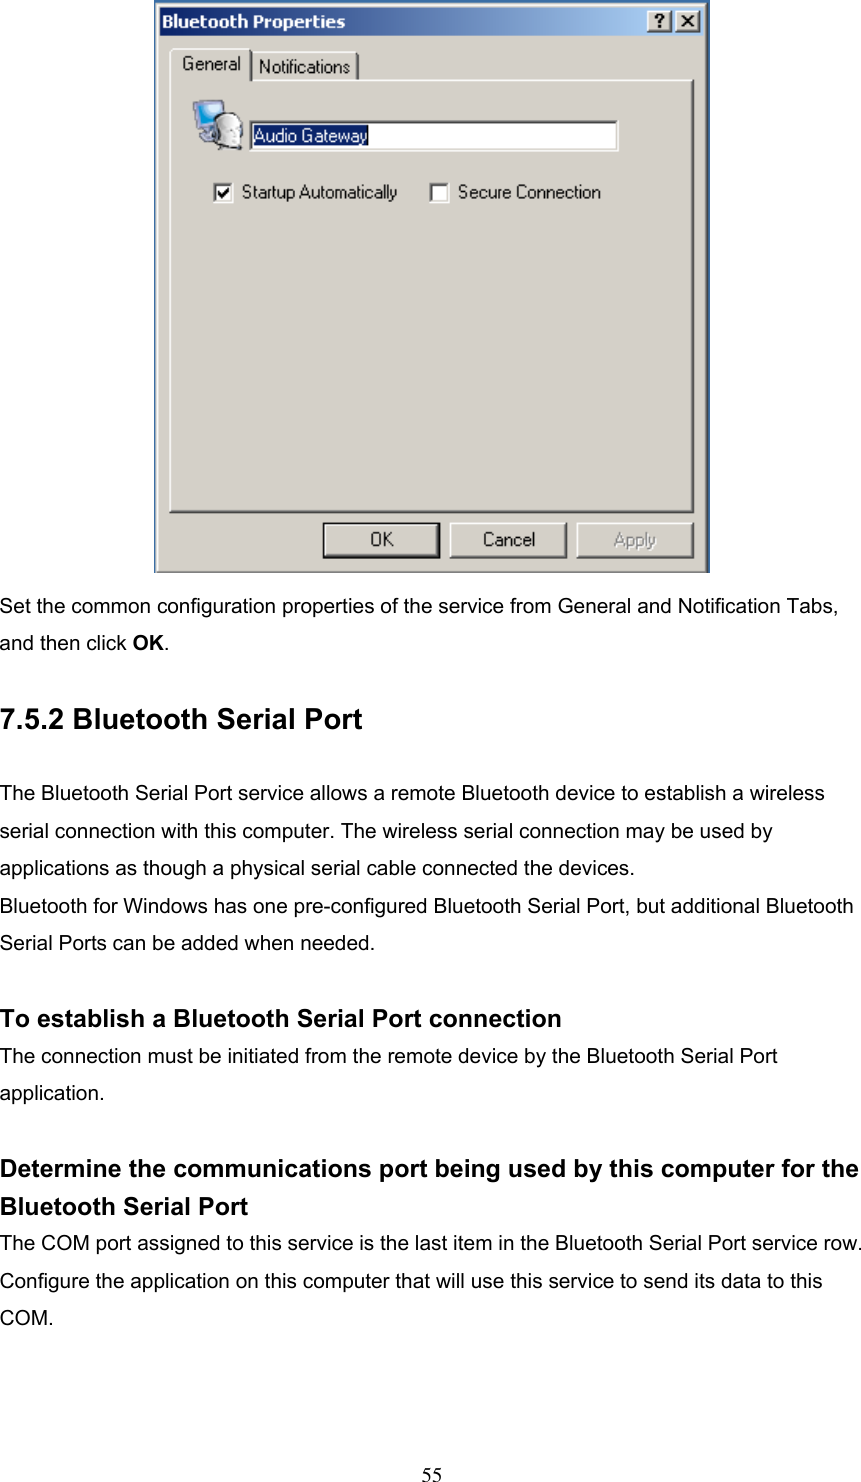  Set the common configuration properties of the service from General and Notification Tabs, and then click OK.  7.5.2 Bluetooth Serial Port  The Bluetooth Serial Port service allows a remote Bluetooth device to establish a wireless serial connection with this computer. The wireless serial connection may be used by applications as though a physical serial cable connected the devices. Bluetooth for Windows has one pre-configured Bluetooth Serial Port, but additional Bluetooth Serial Ports can be added when needed.  To establish a Bluetooth Serial Port connection The connection must be initiated from the remote device by the Bluetooth Serial Port application.  Determine the communications port being used by this computer for the Bluetooth Serial Port The COM port assigned to this service is the last item in the Bluetooth Serial Port service row. Configure the application on this computer that will use this service to send its data to this COM.   55 